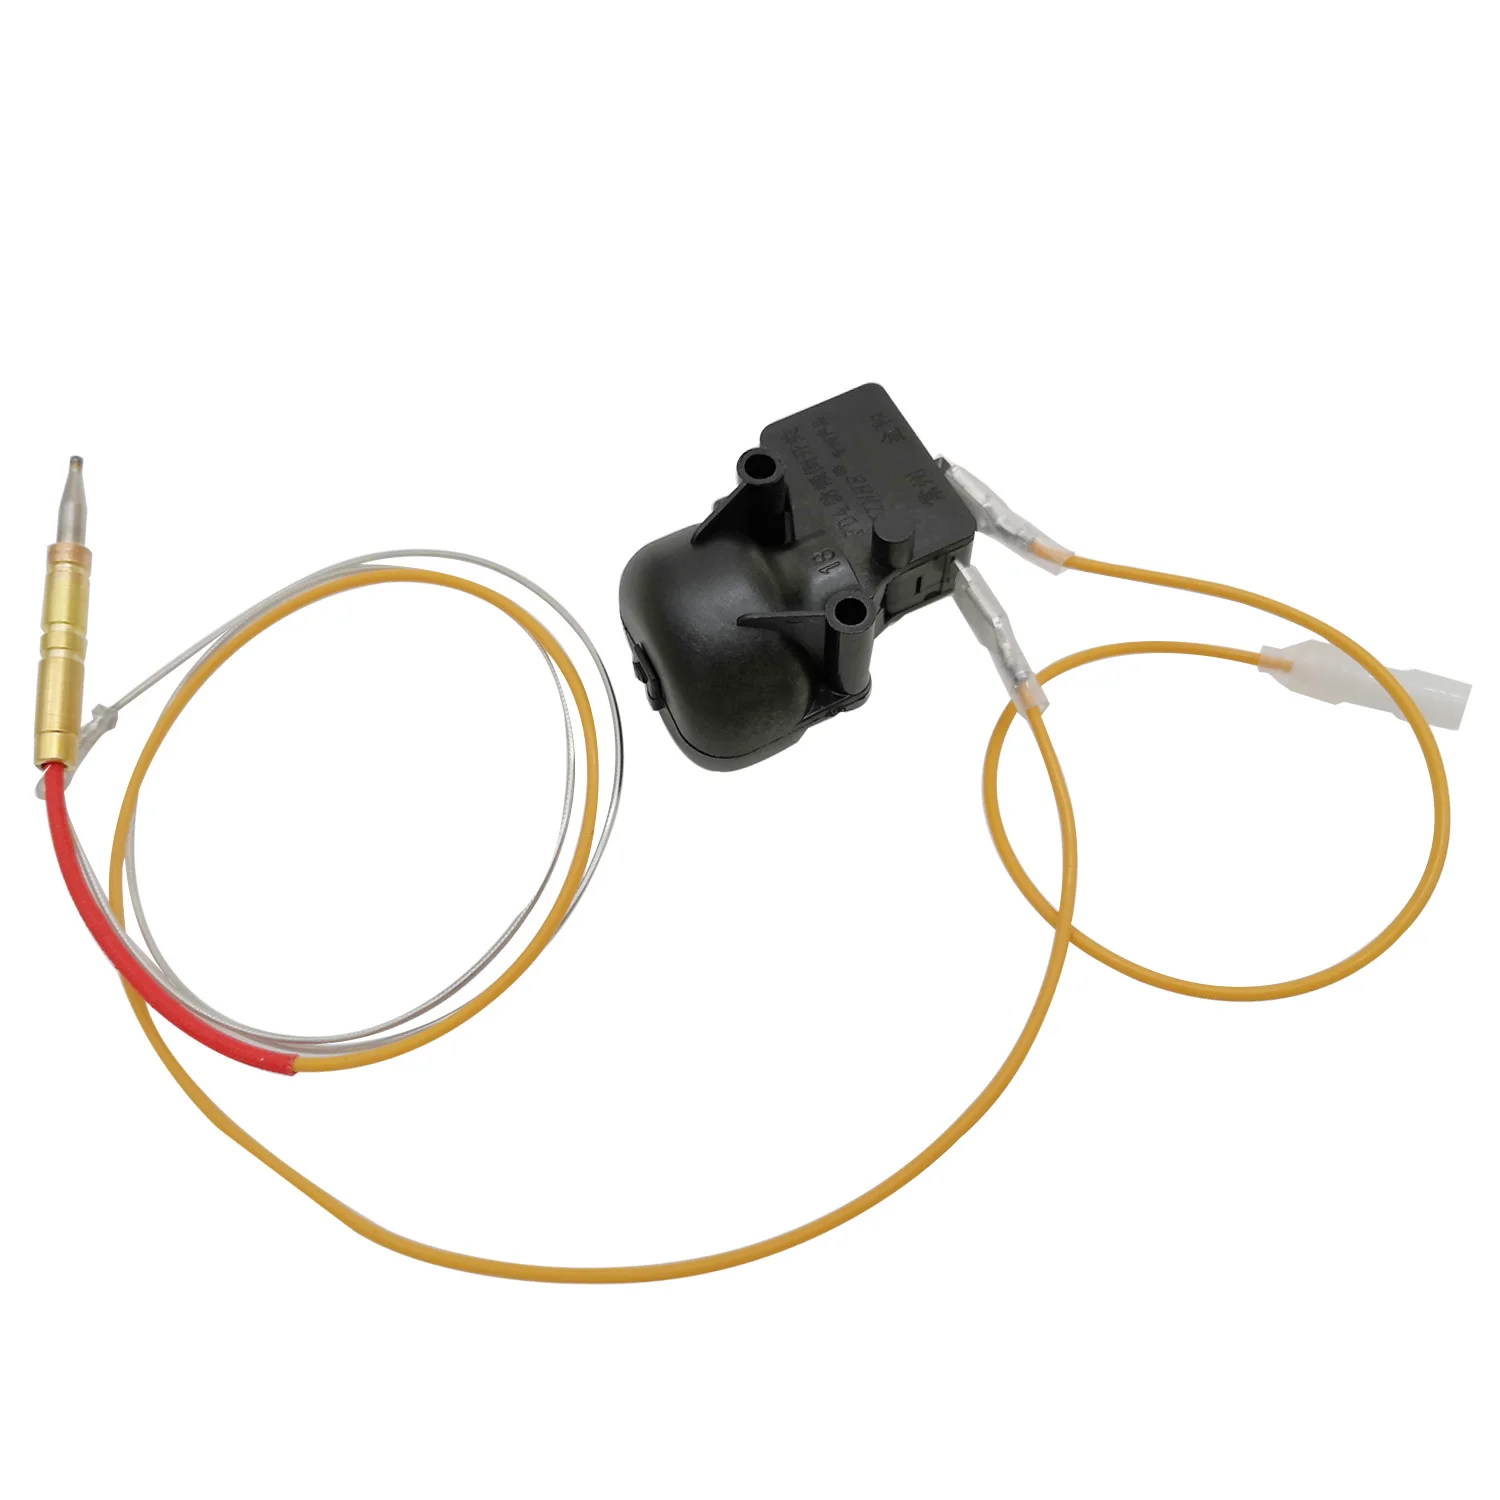 Details about   Propane Tank Top Heater Replacement Parts Faston Type Thermocouple Assembly Kit 